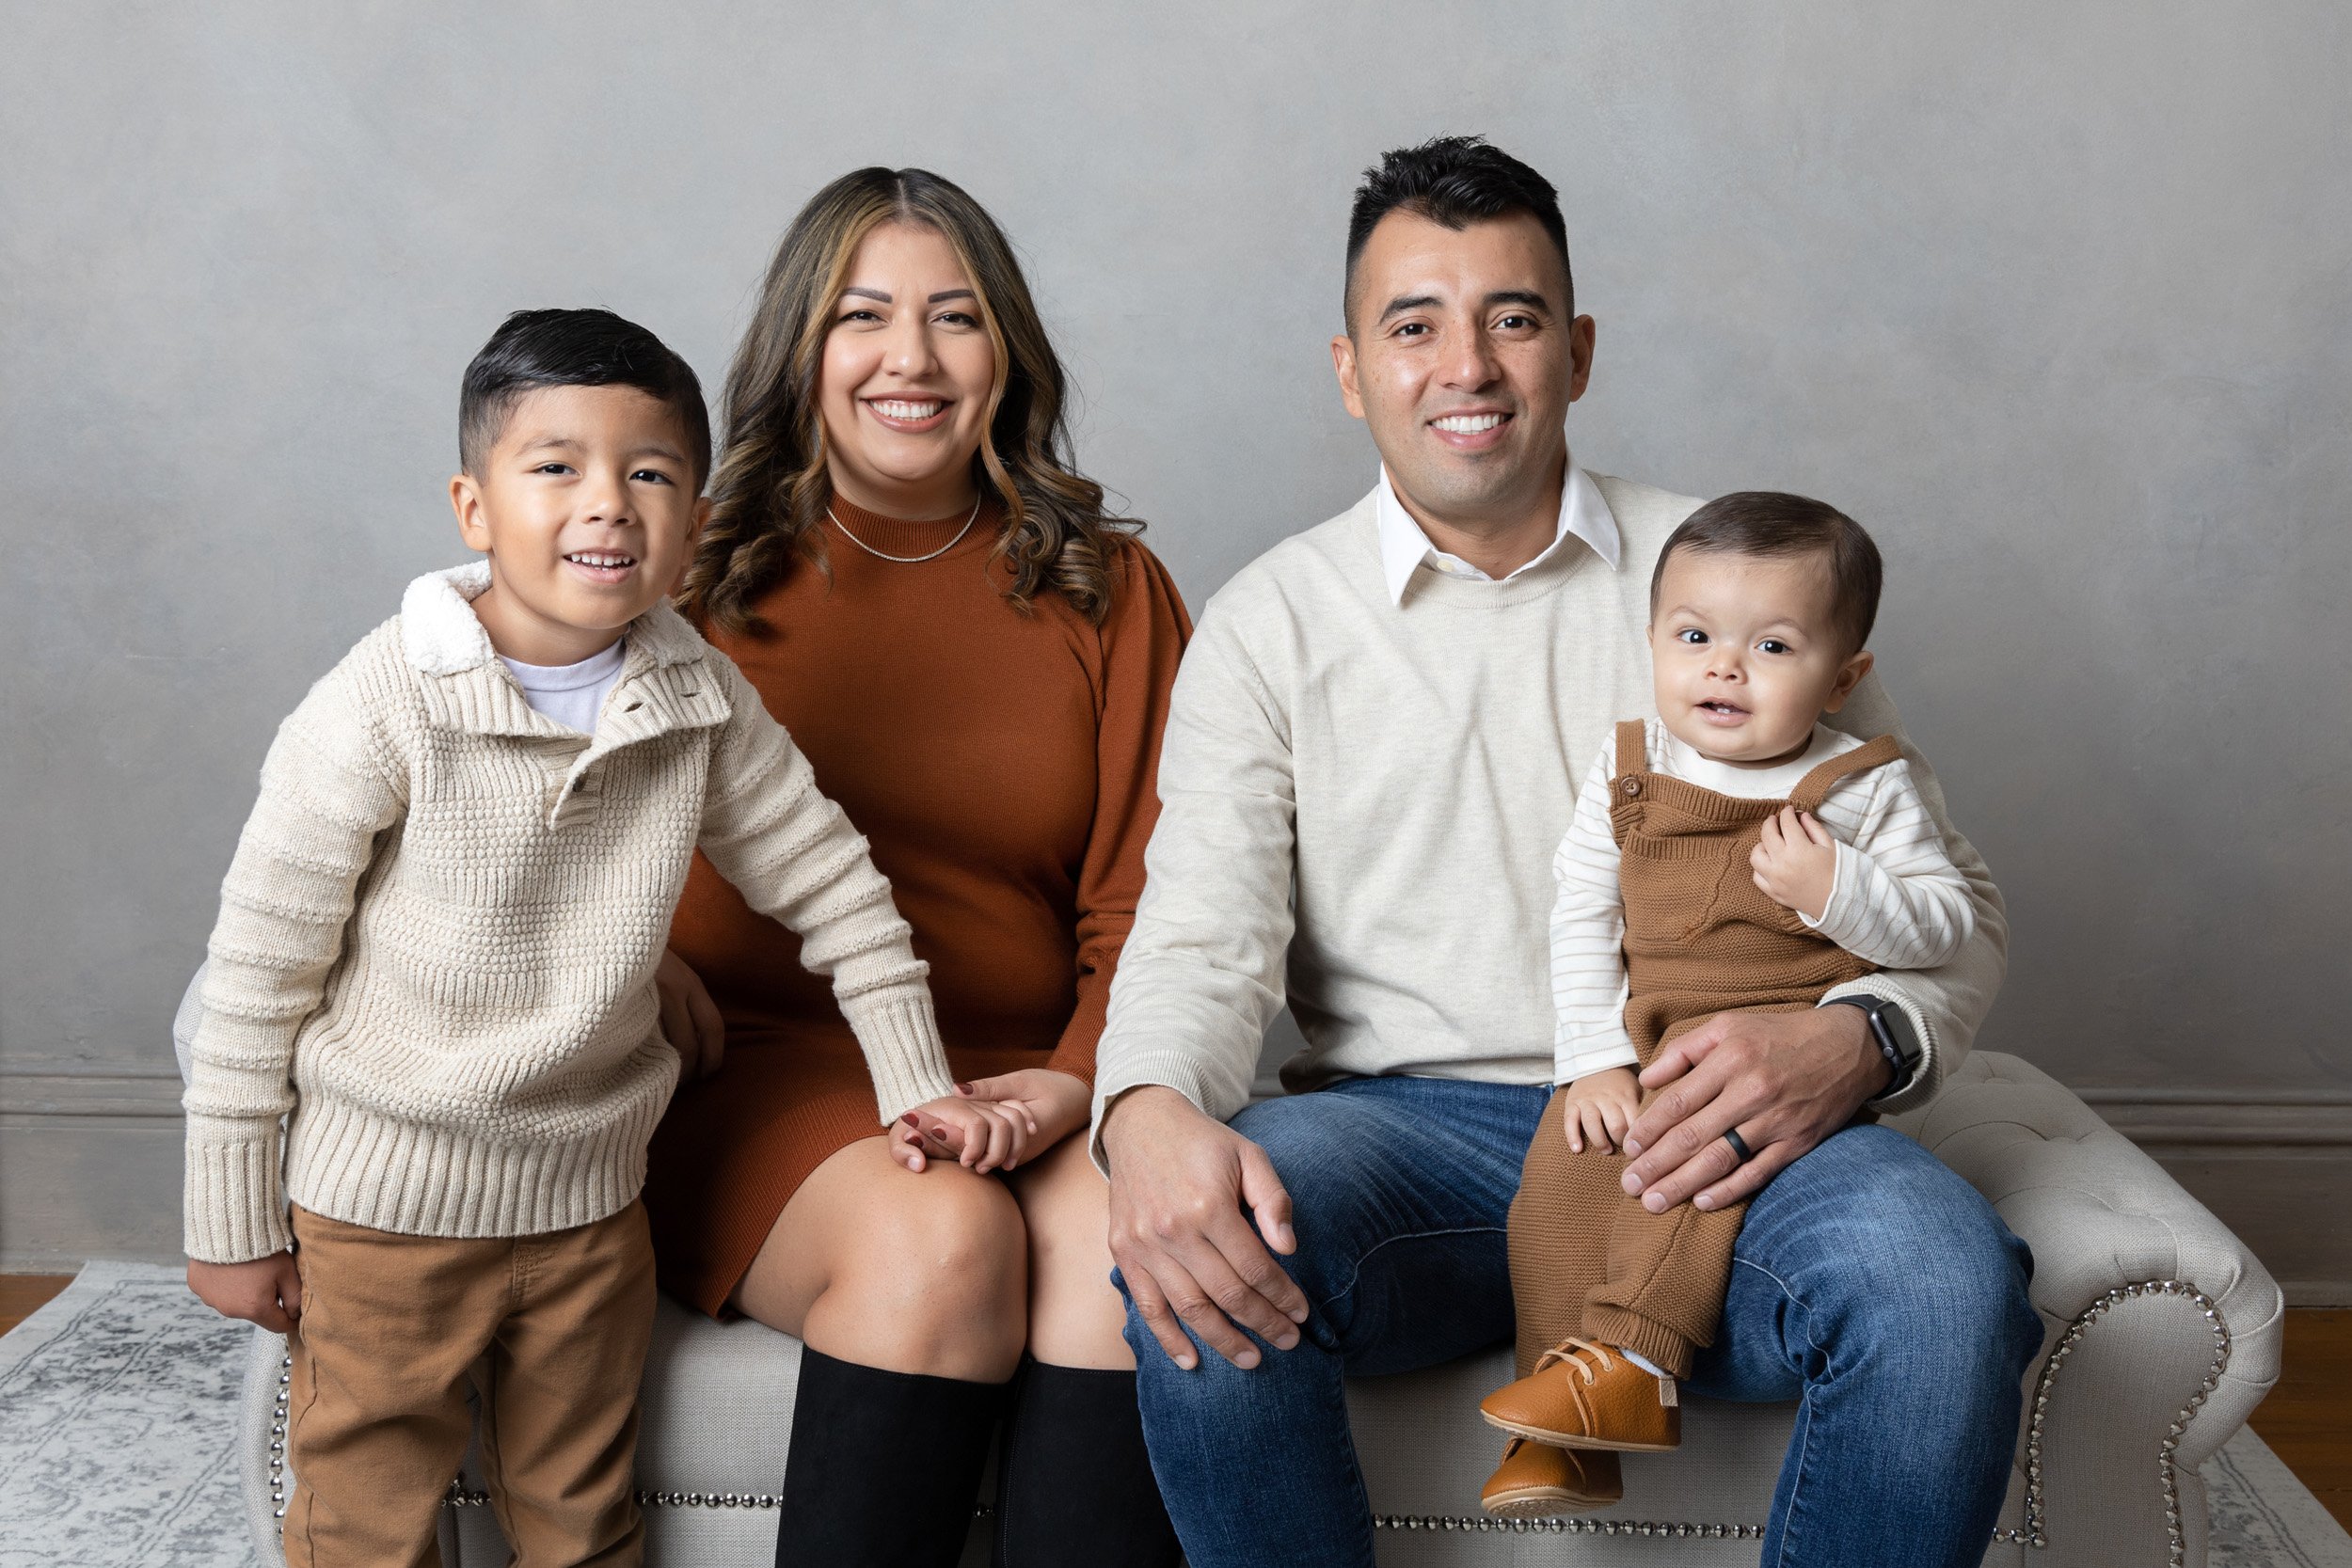 what to know for a great multi-family portrait session — Lea